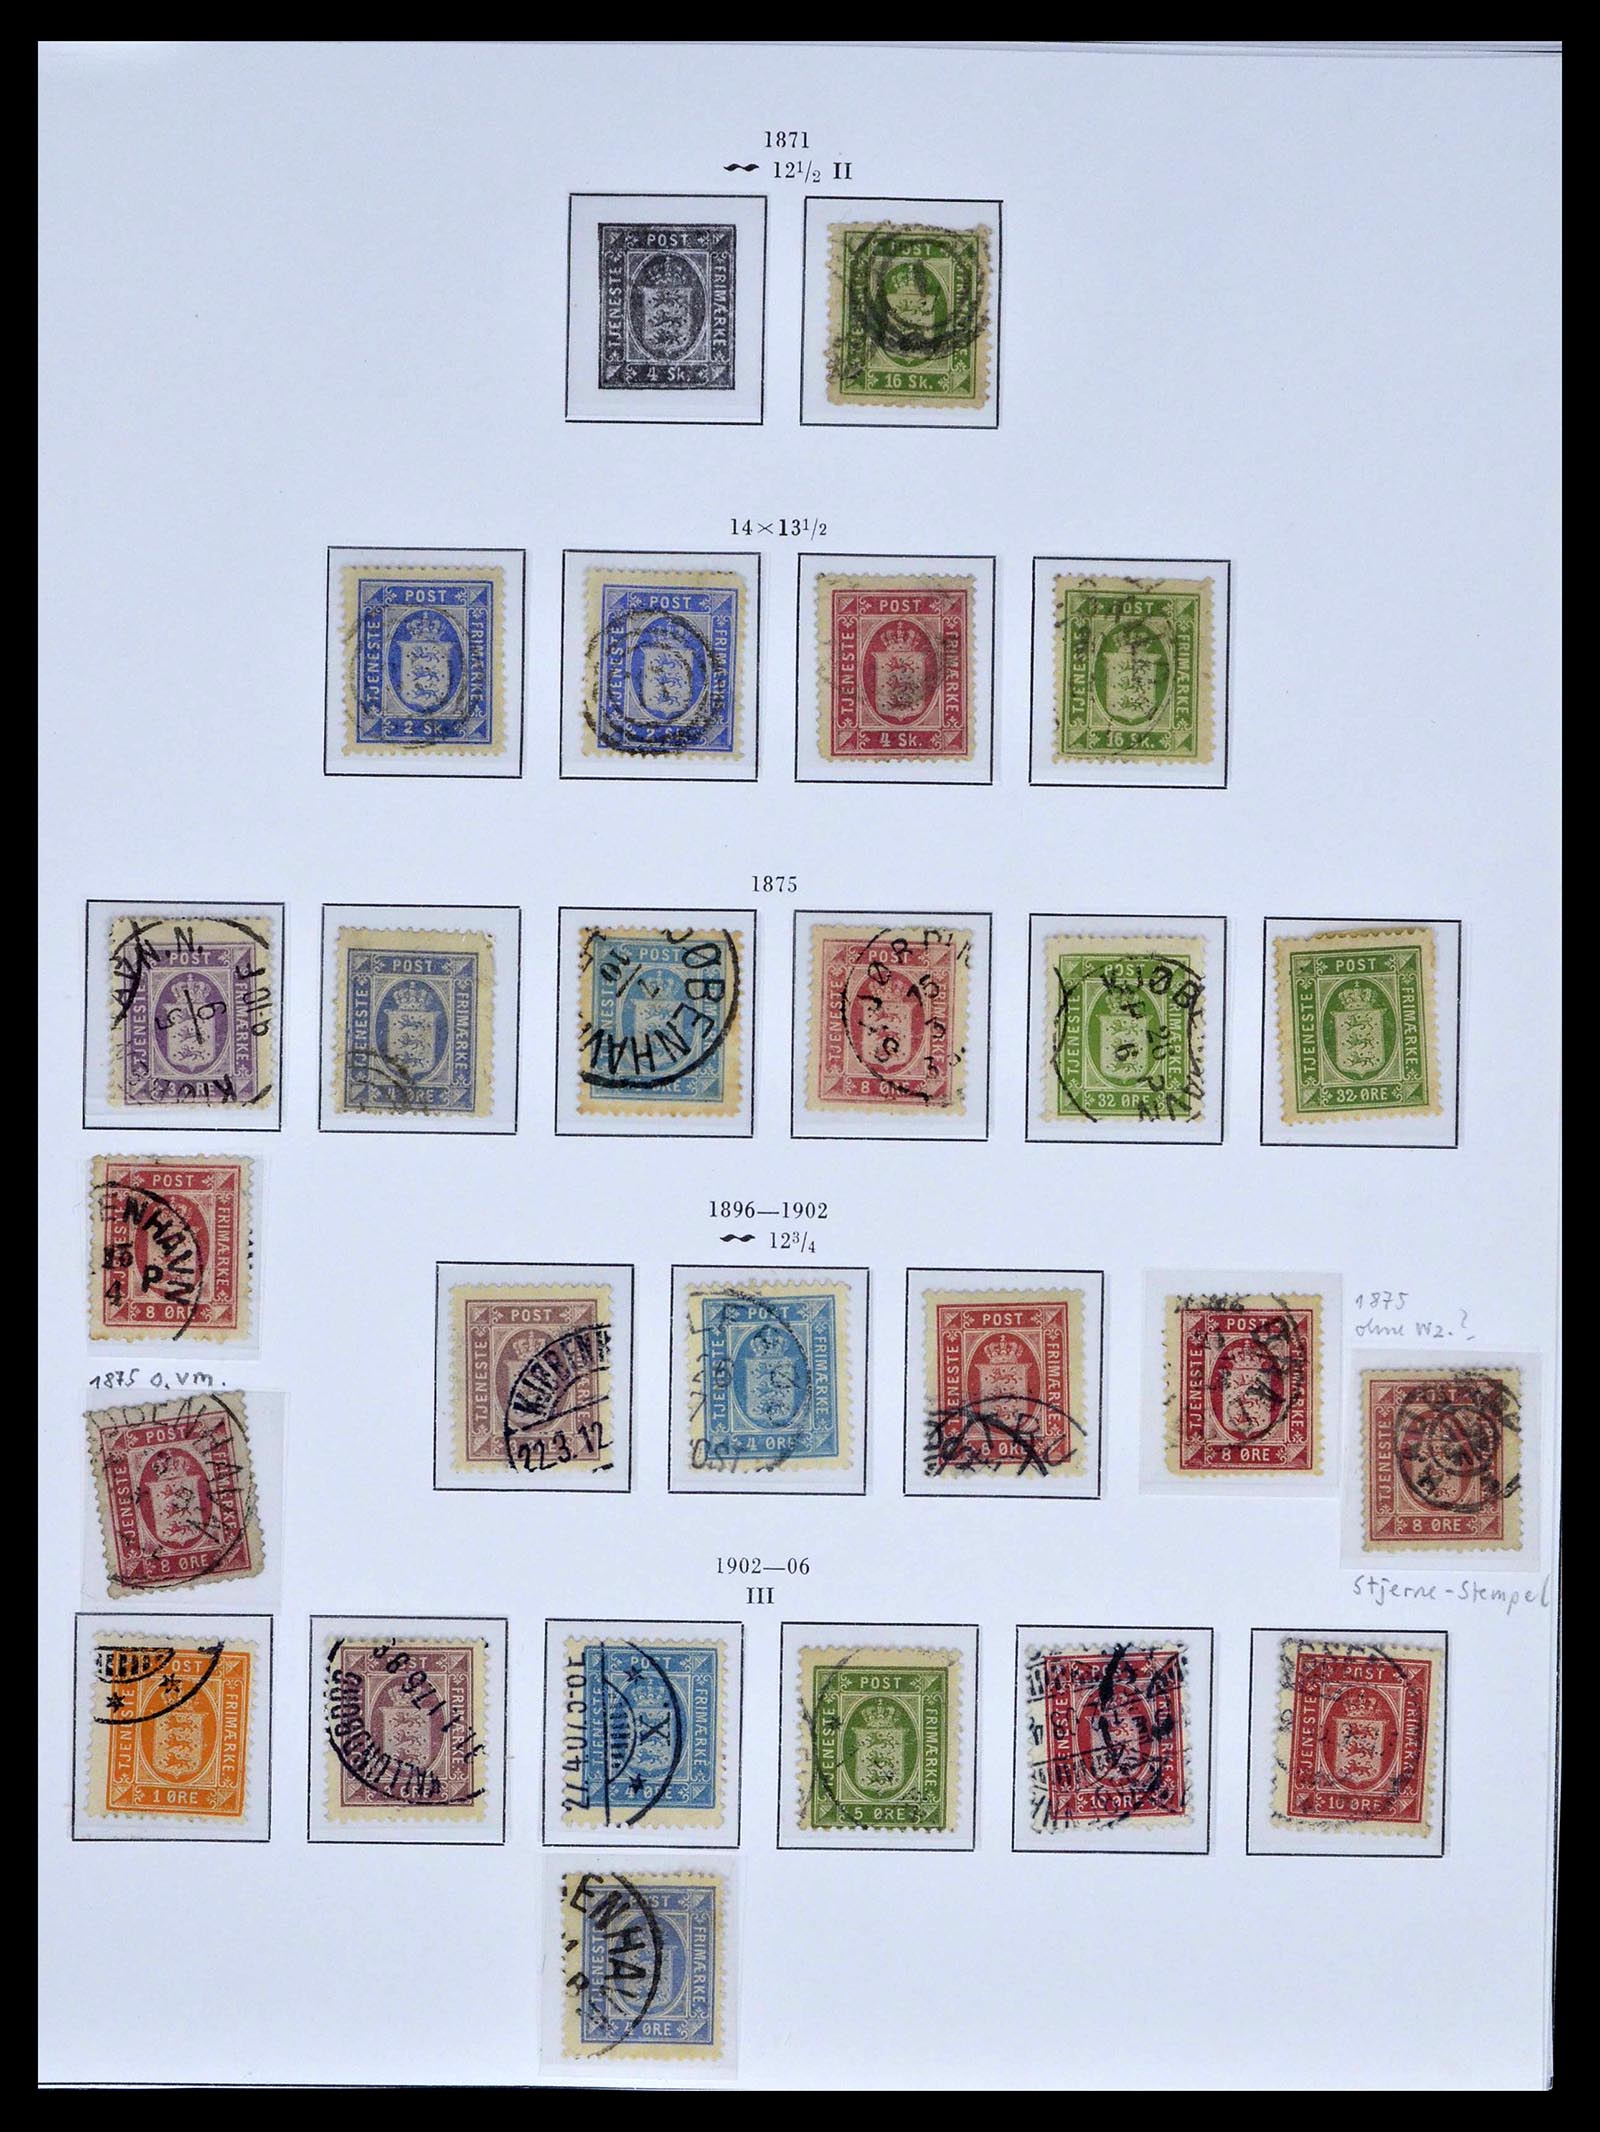 39407 0045 - Stamp collection 39407 Denmark 1851-1969.